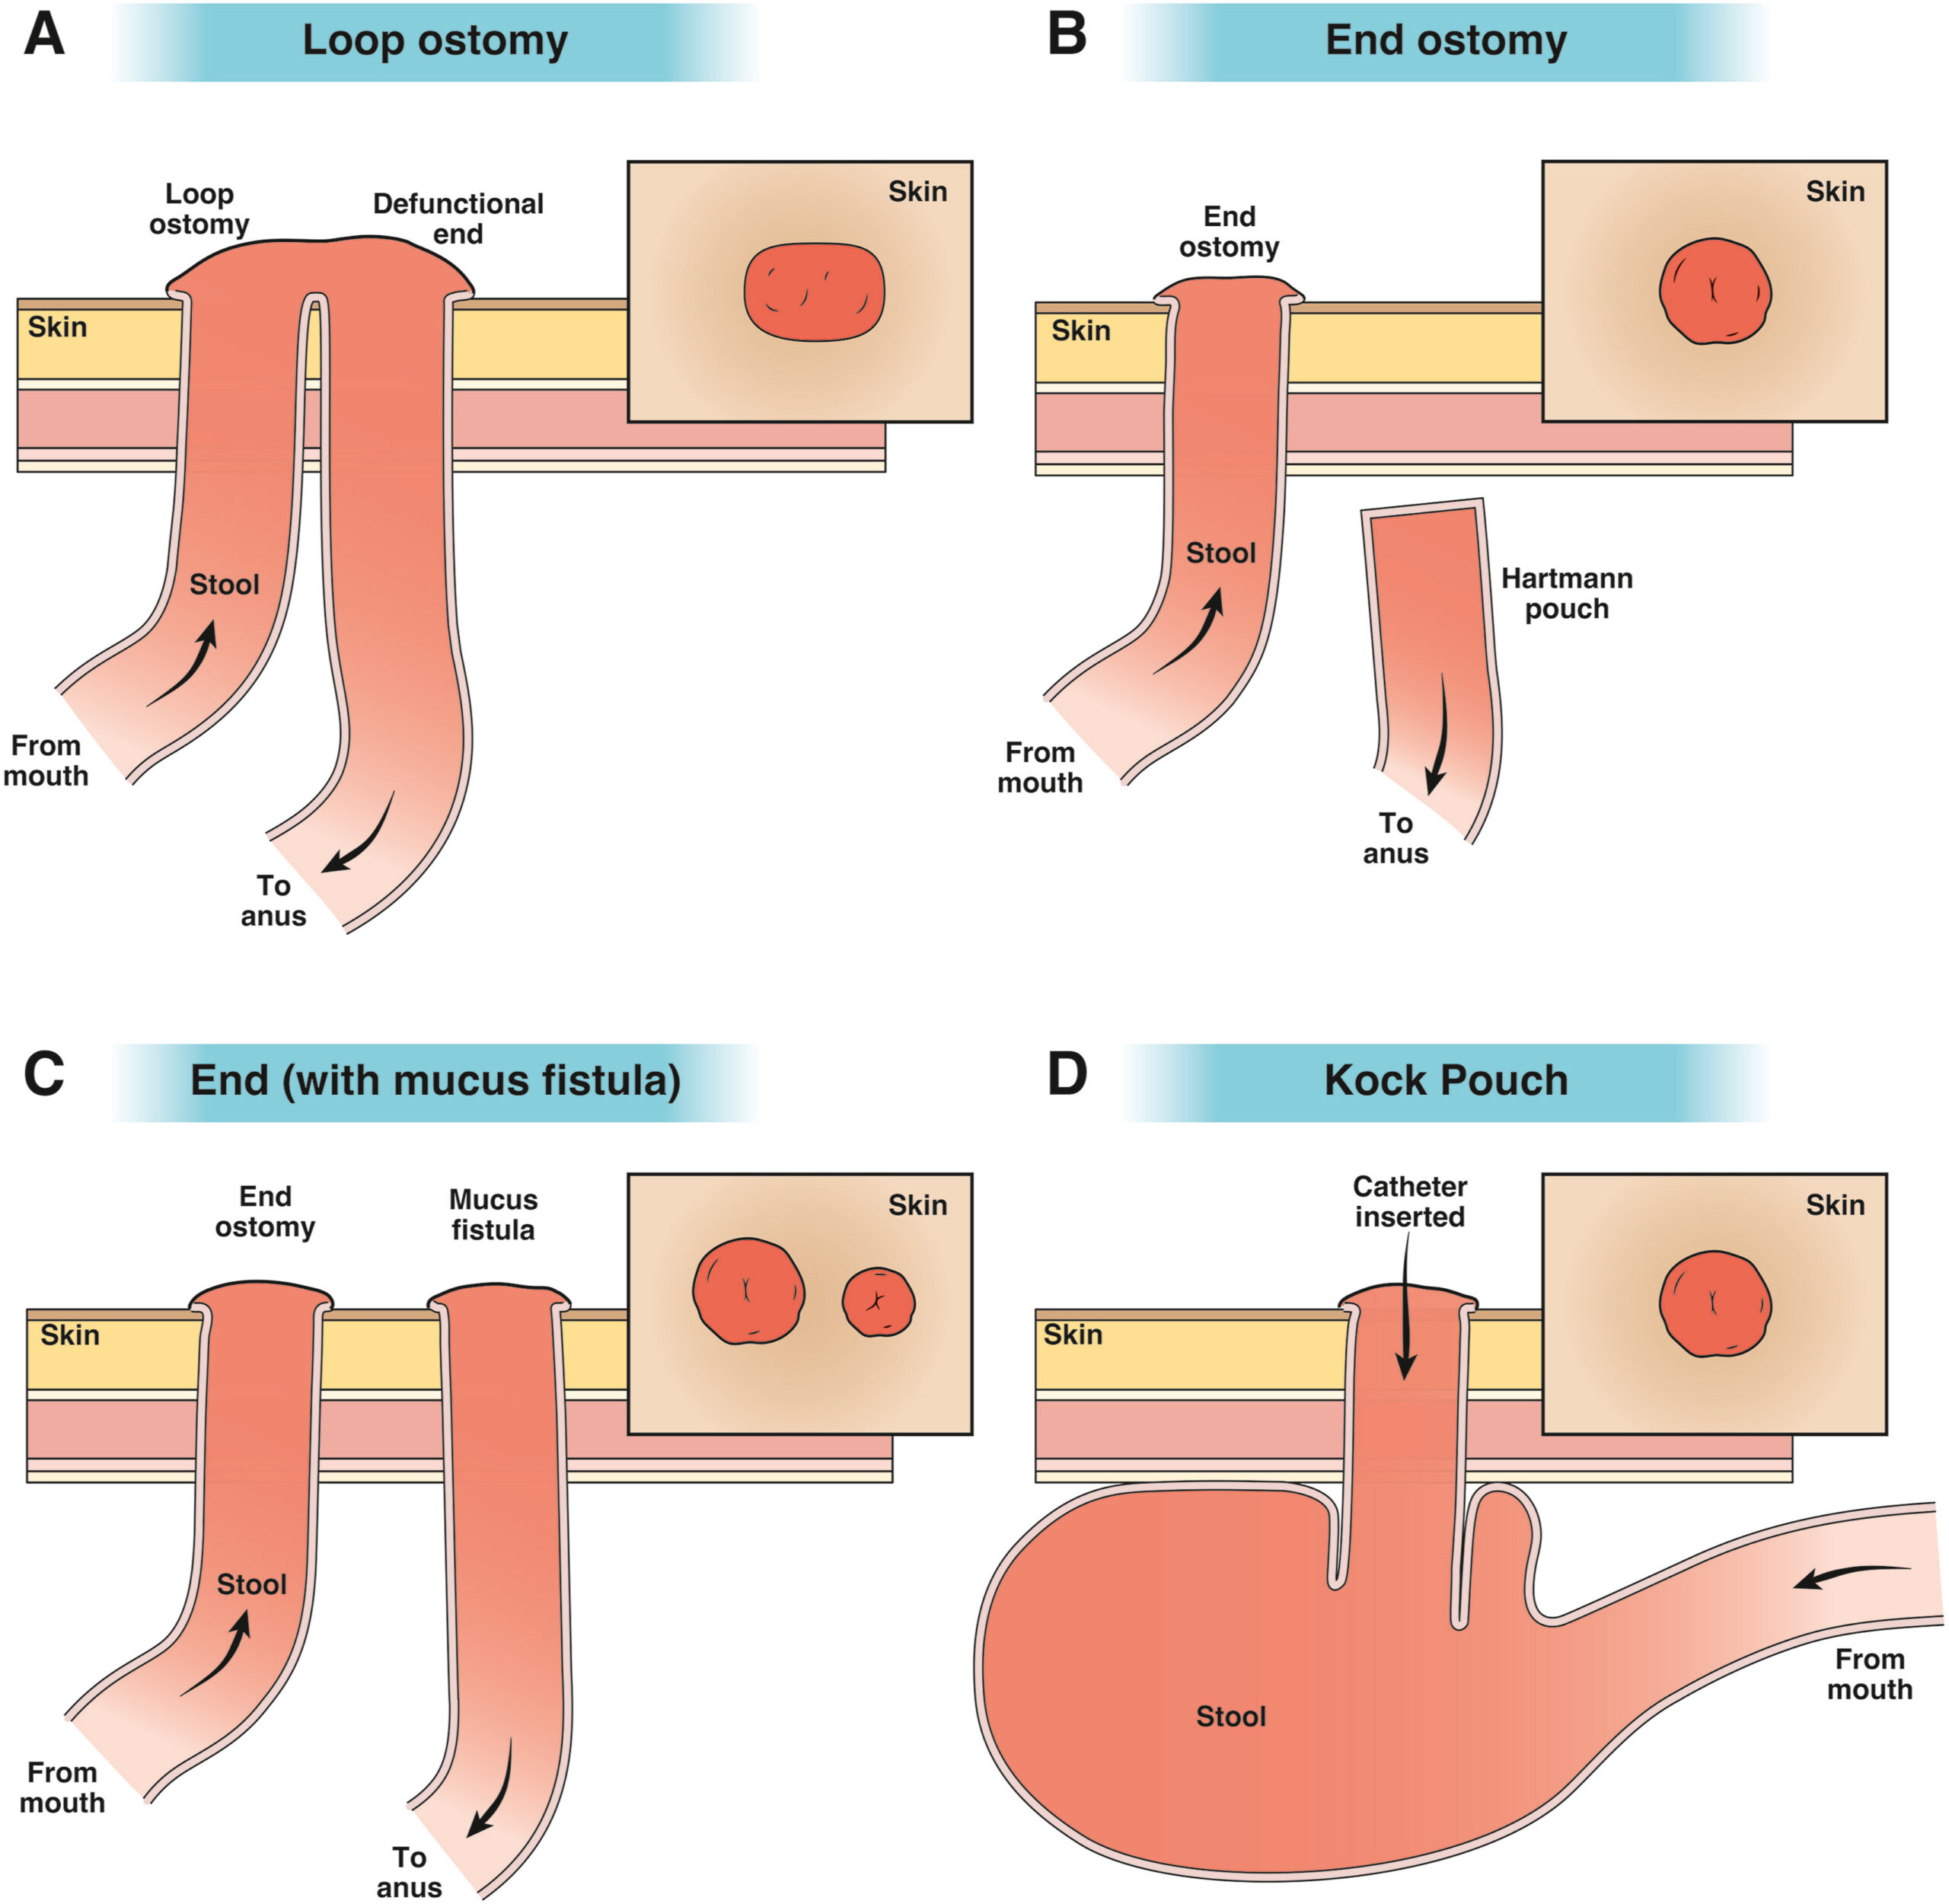 Schematic of different types of ostomy configurations including the (A) loop ostomy, (B) end ostomy with Hartmann’s pouch, (C) end ostomy with mucus fistula, and (D) the continent ileostomy (Kock pouch).